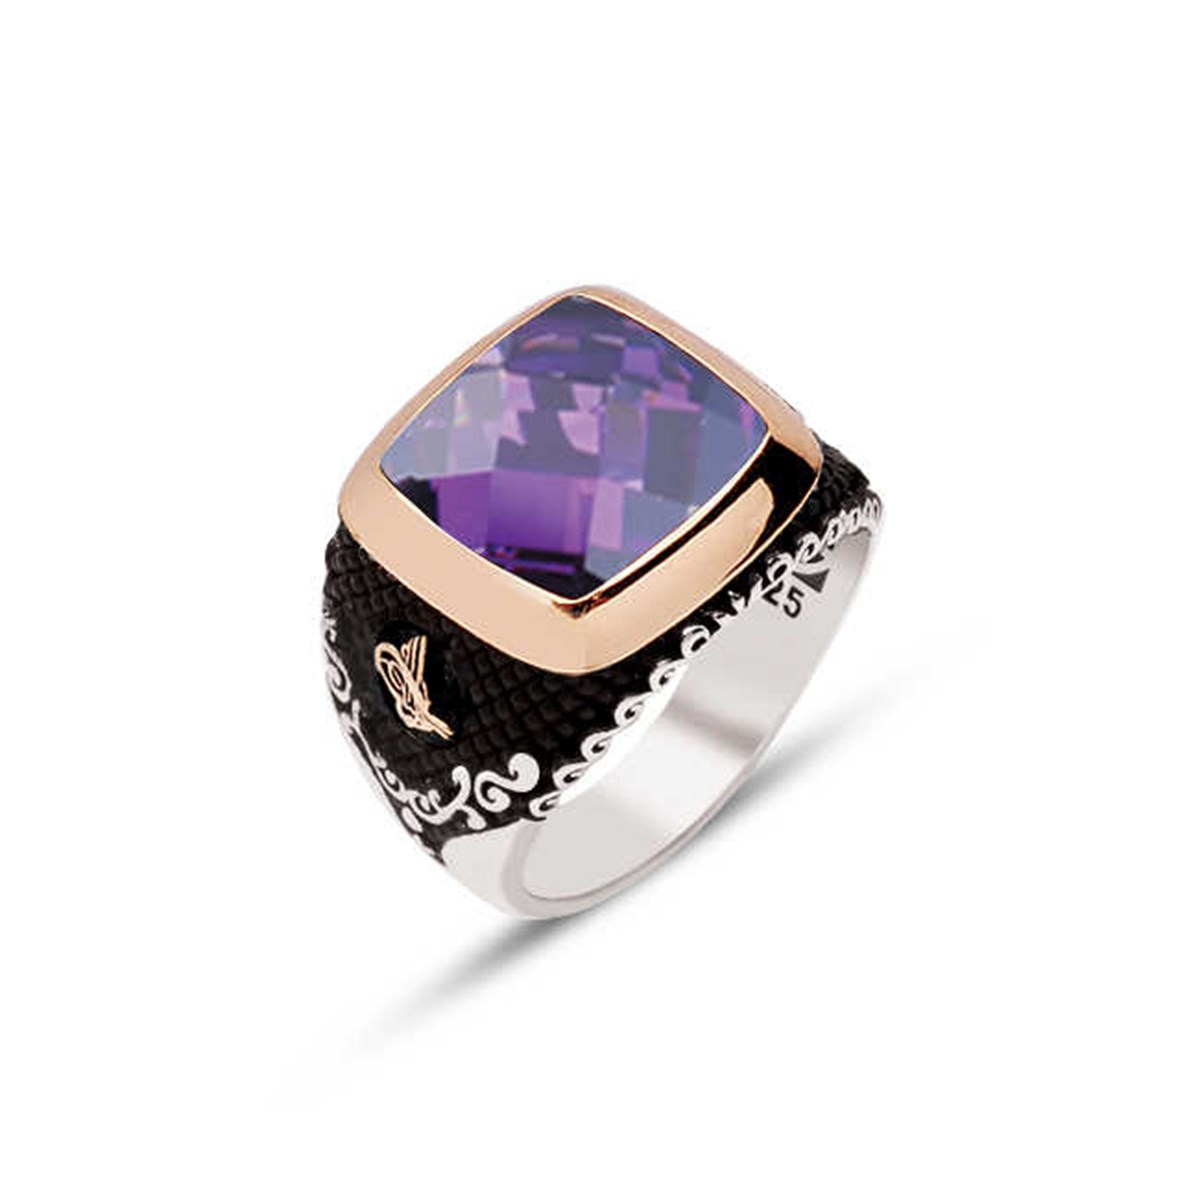 Silver Faceted Amethyst And Zircon Stone Tugra Men's Ring